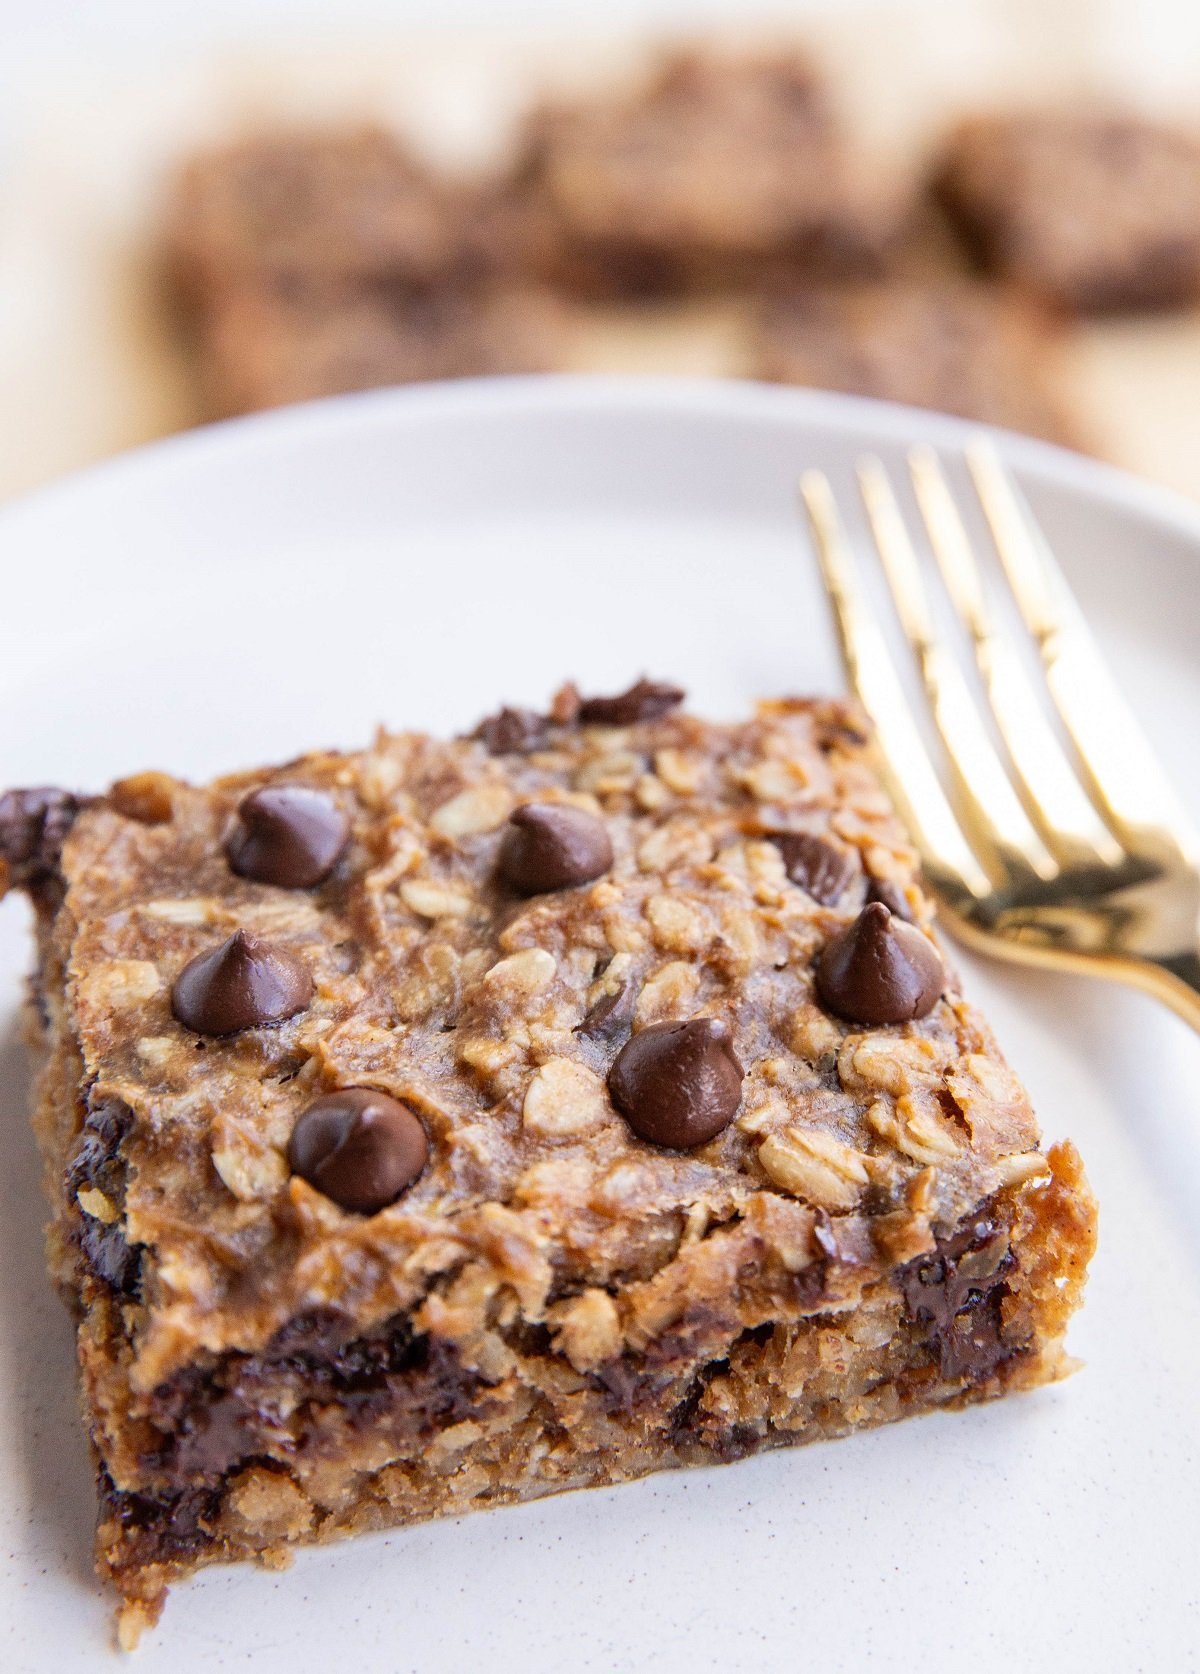 Slice of banana peanut butter oatmeal bar on a plate with a fork and more bars in the background.